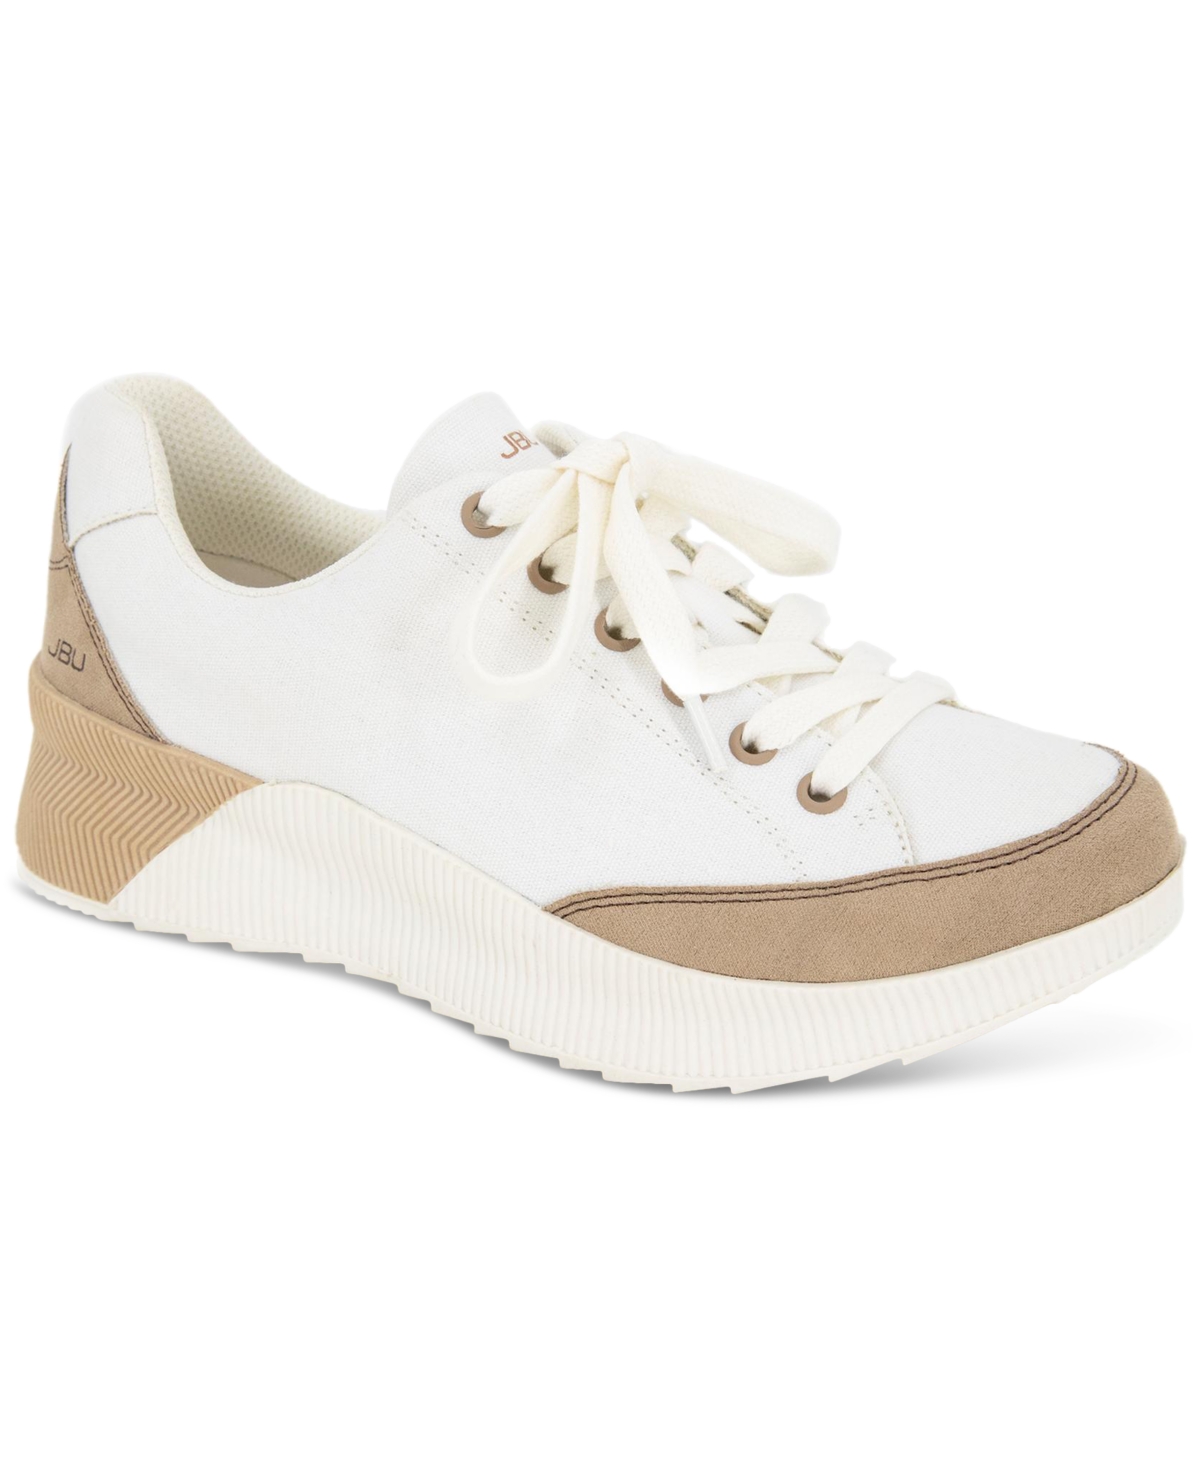 Jbu Women's Quincey Lace-up Low-top Sneakers Women's Shoes In Off White/lt Tan